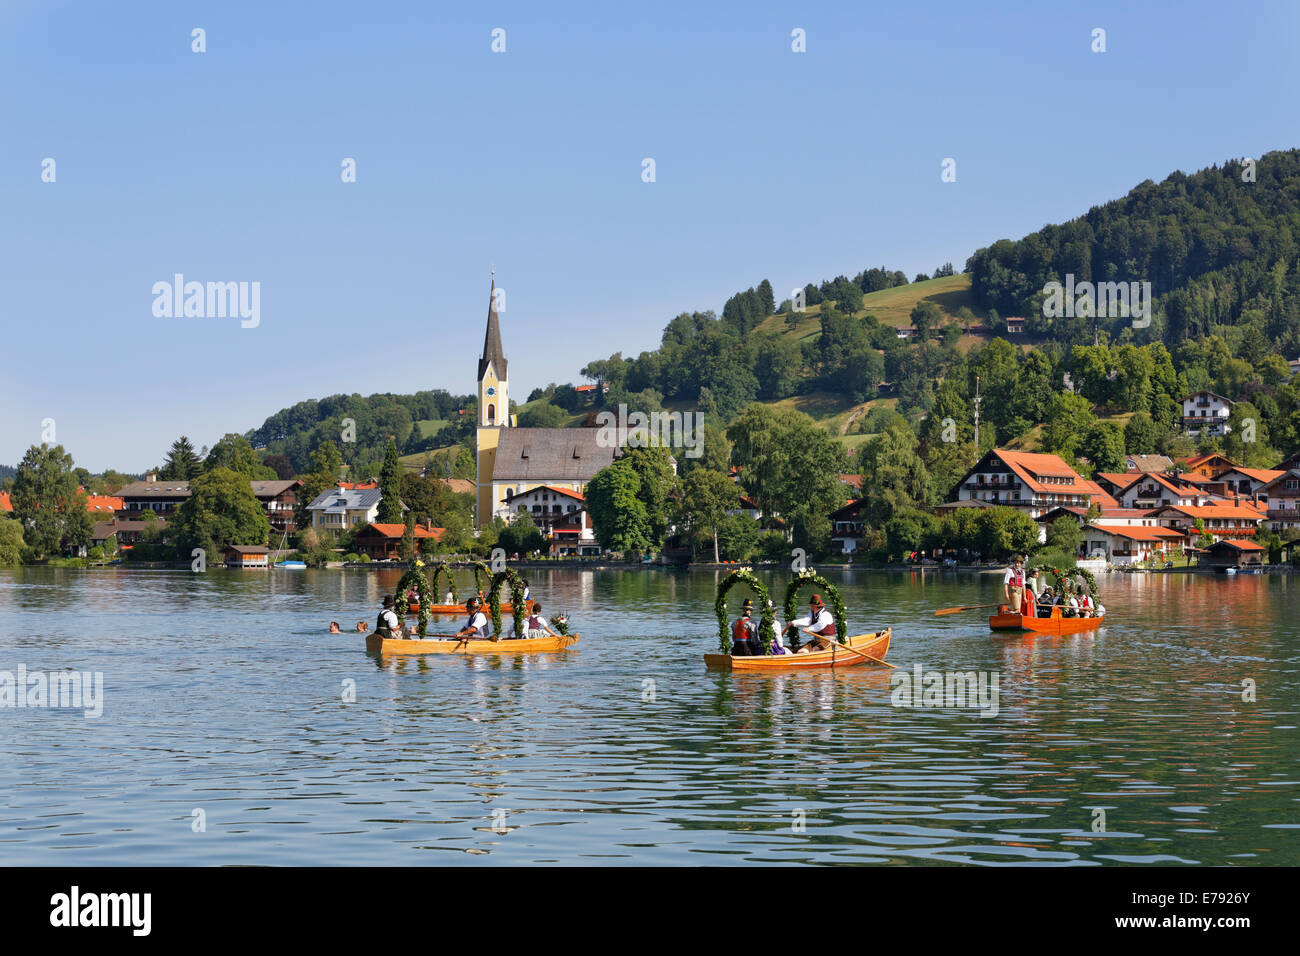 Locals wearing traditional costumes in decorated wooden Plätte boats, the church of St. Sixtus at the back, Stock Photo